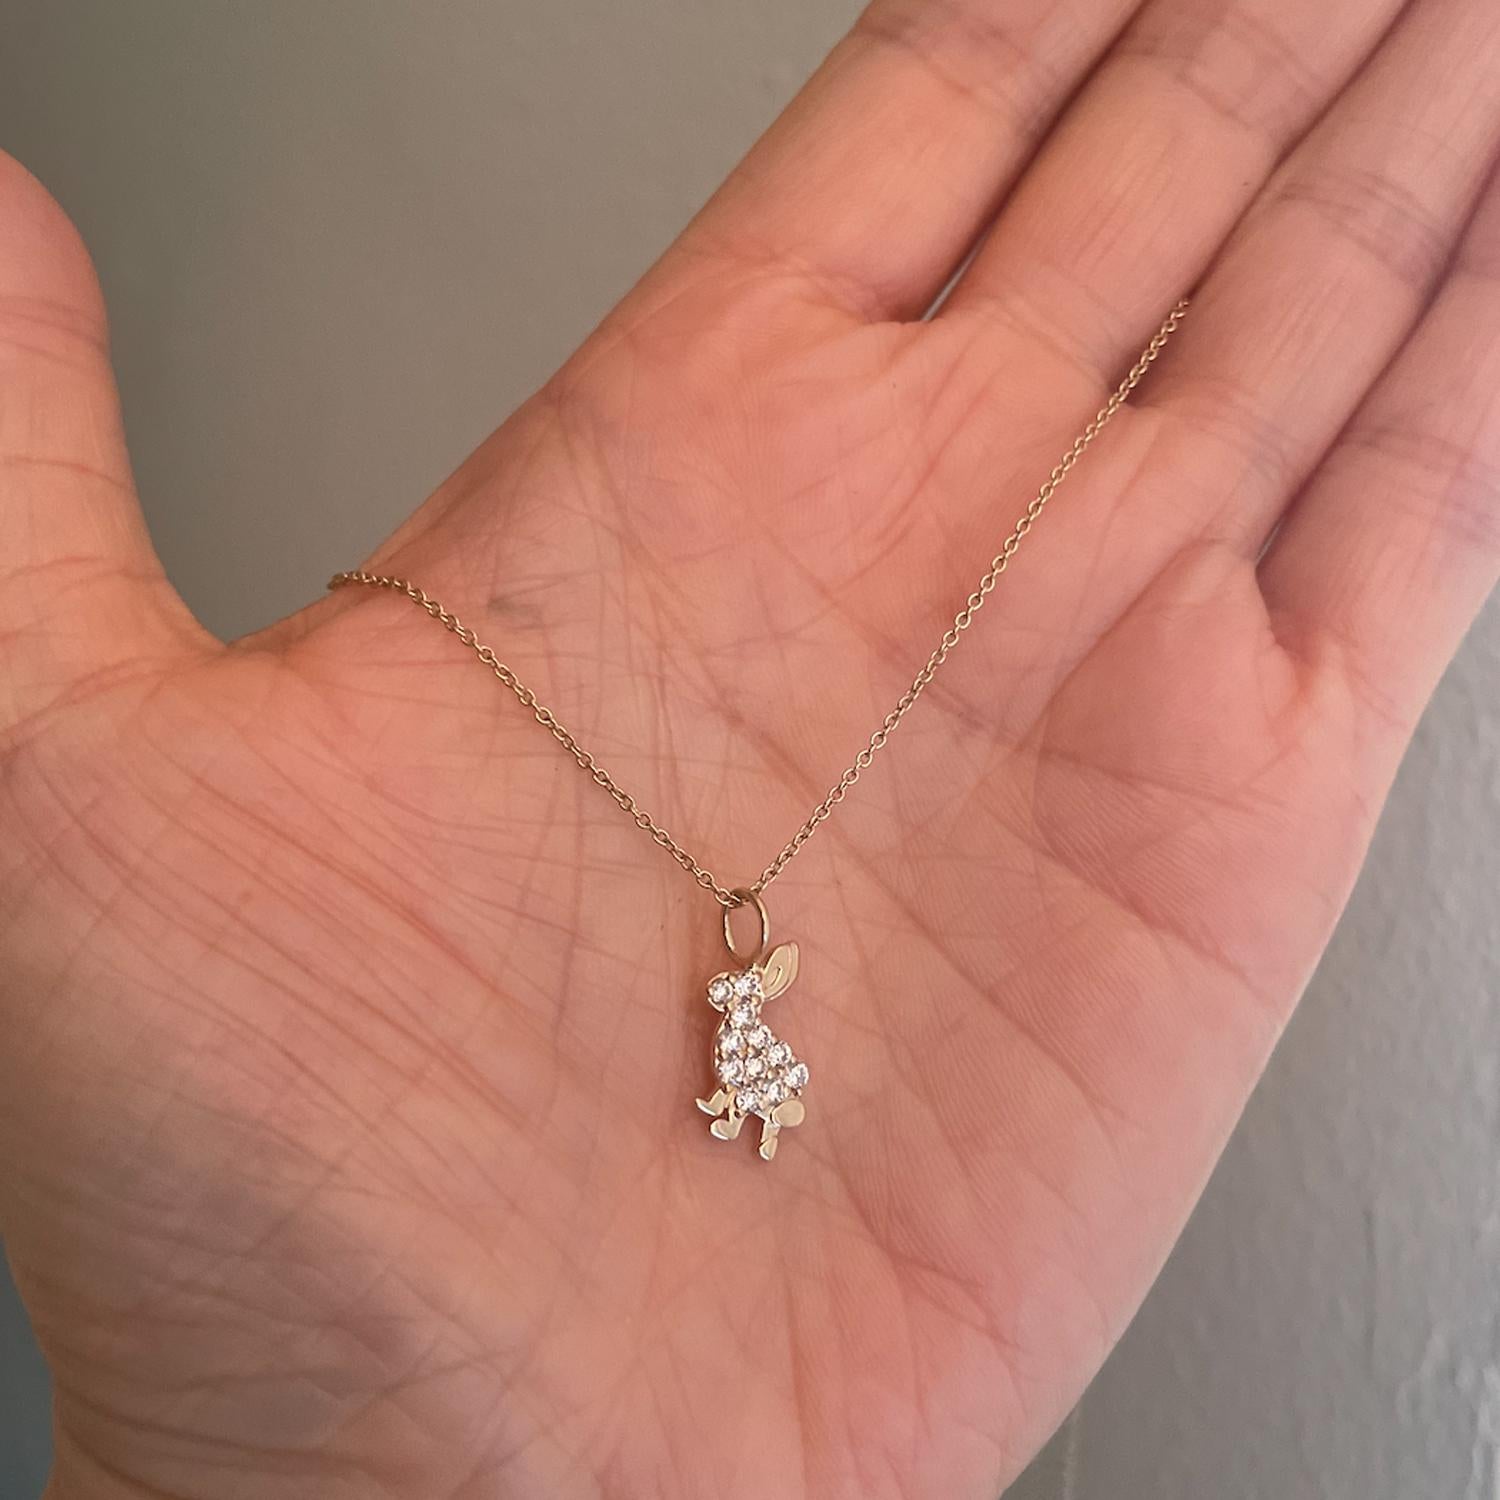 The Diamond Trickster bunny pendant is perfect to wear with a collared shirt or your favorite leisure outfit. This sweet pendant is a larger size than our Trickster bunny stud earrings. It is from the Trickster Bunny Collection inspired by Alice in